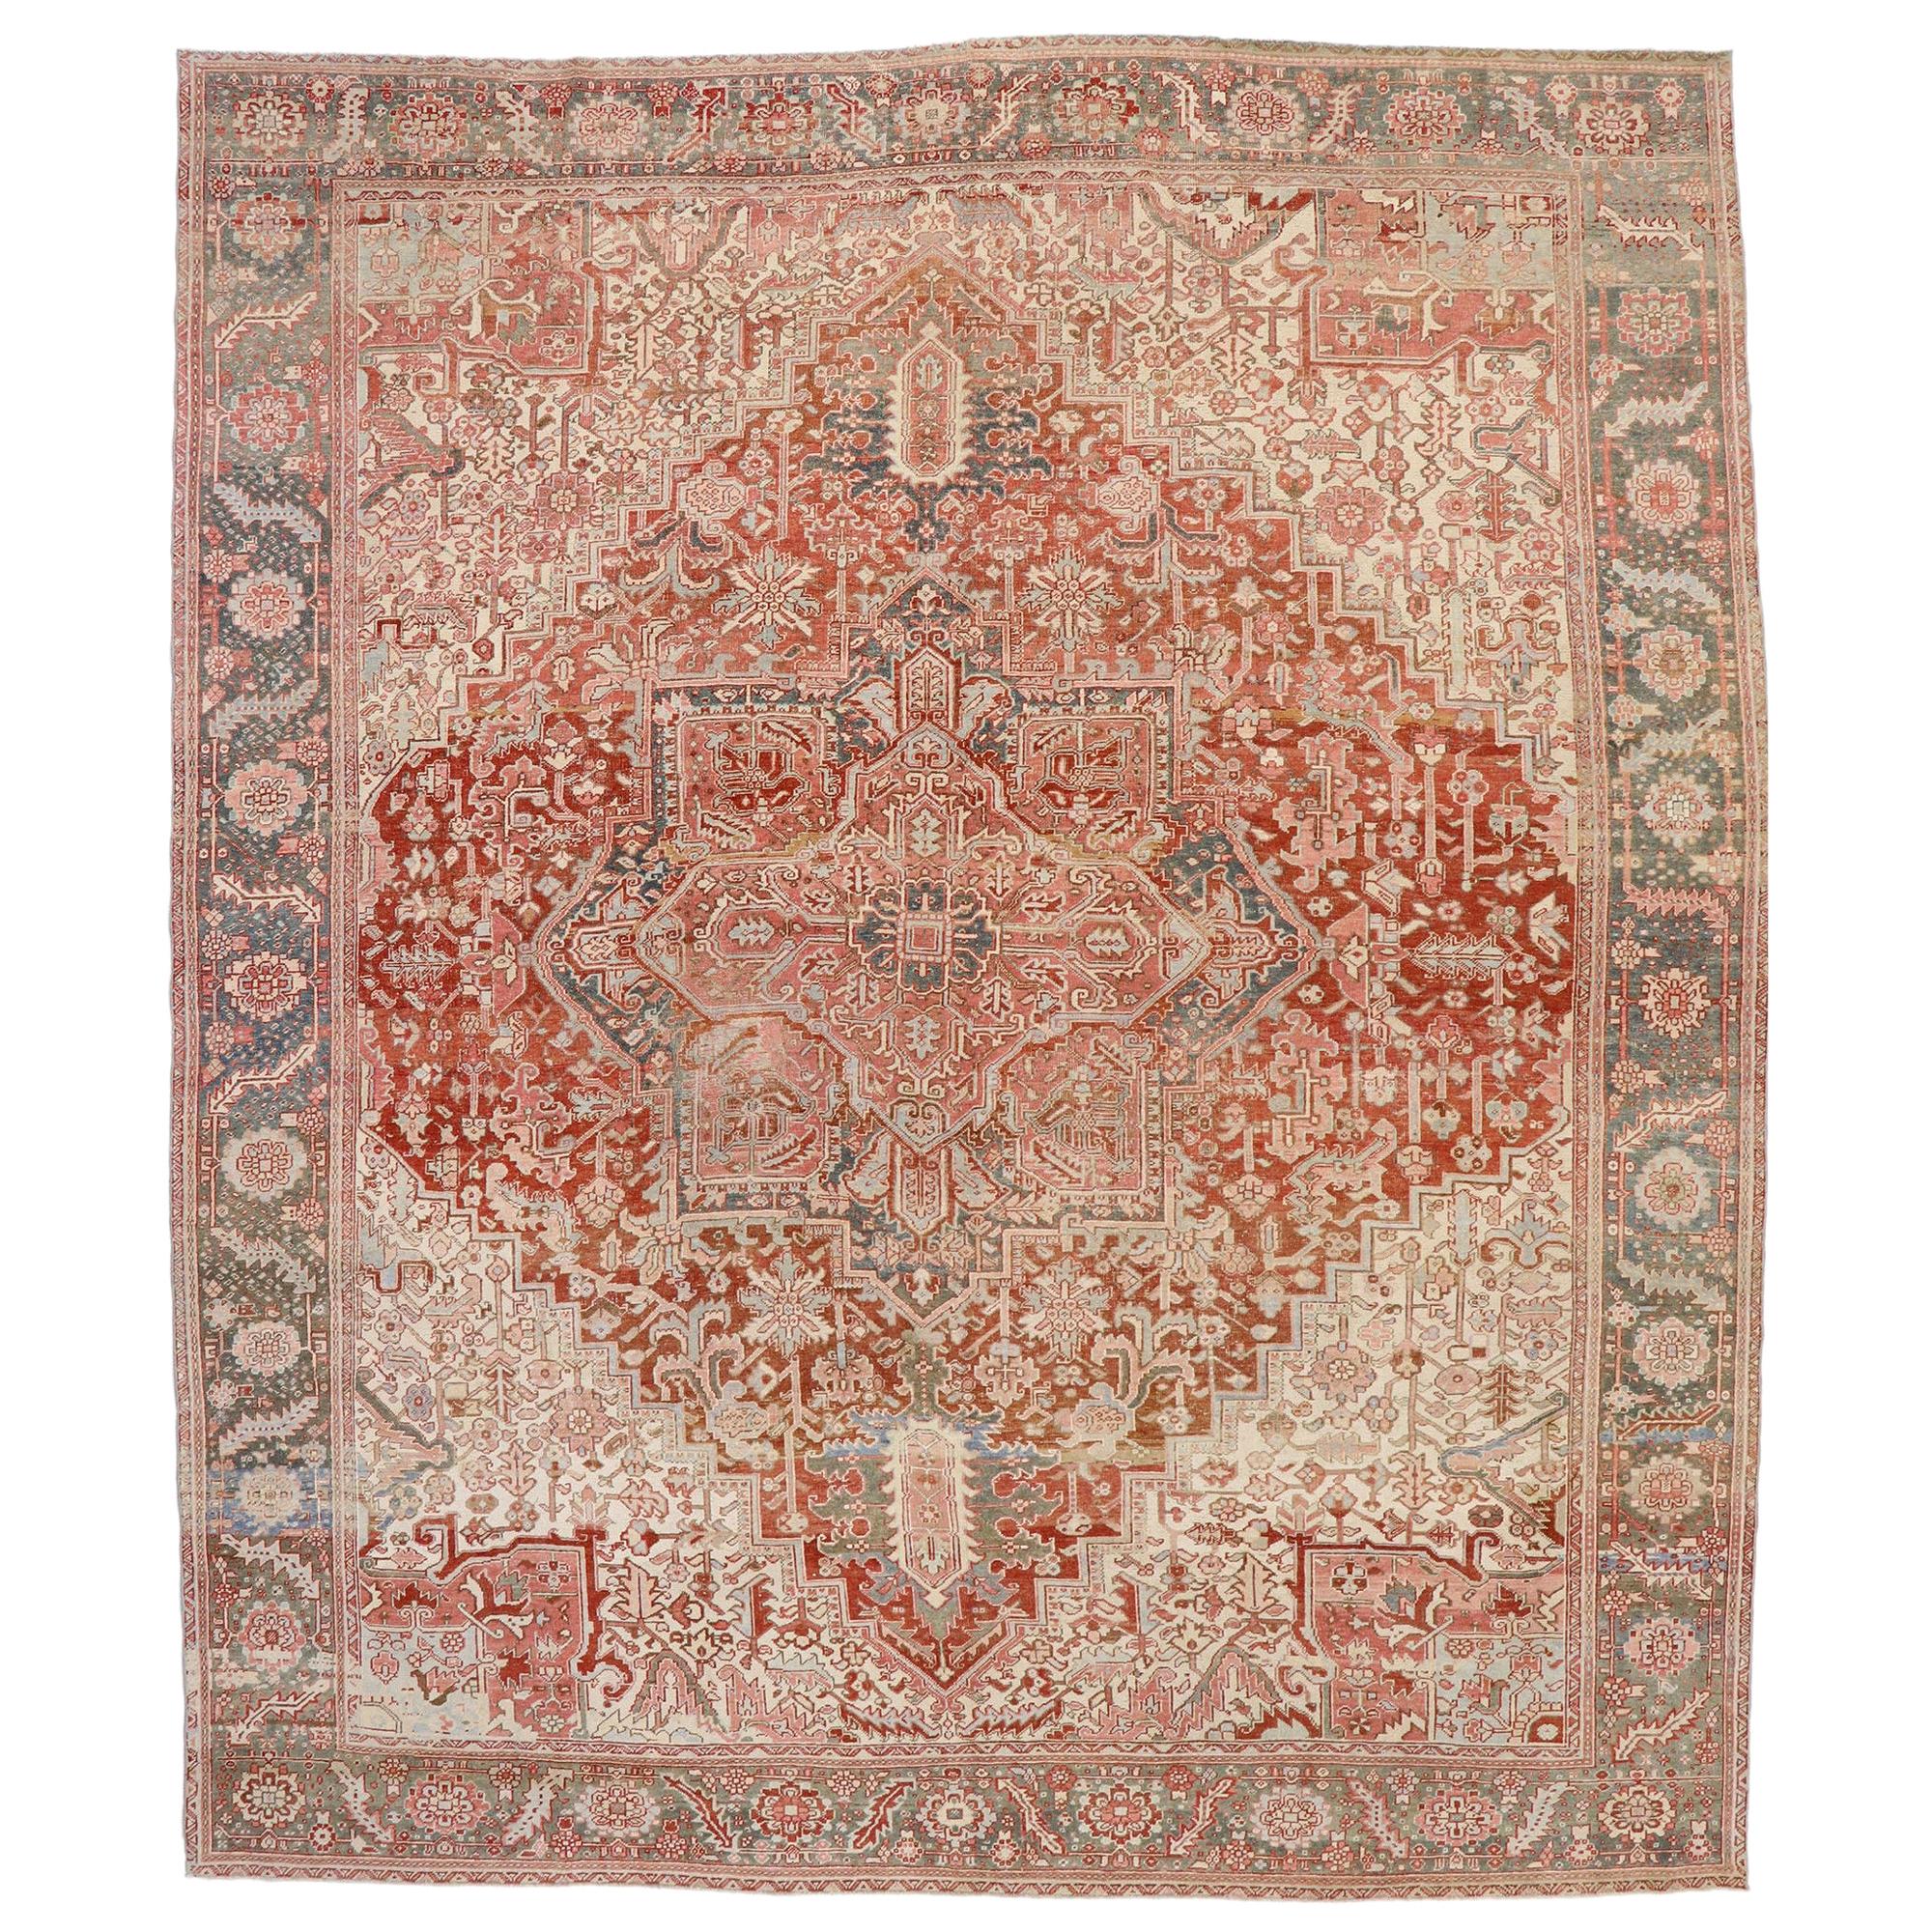 Distressed Antique Persian Heriz Rug with Rustic Bohemian Style